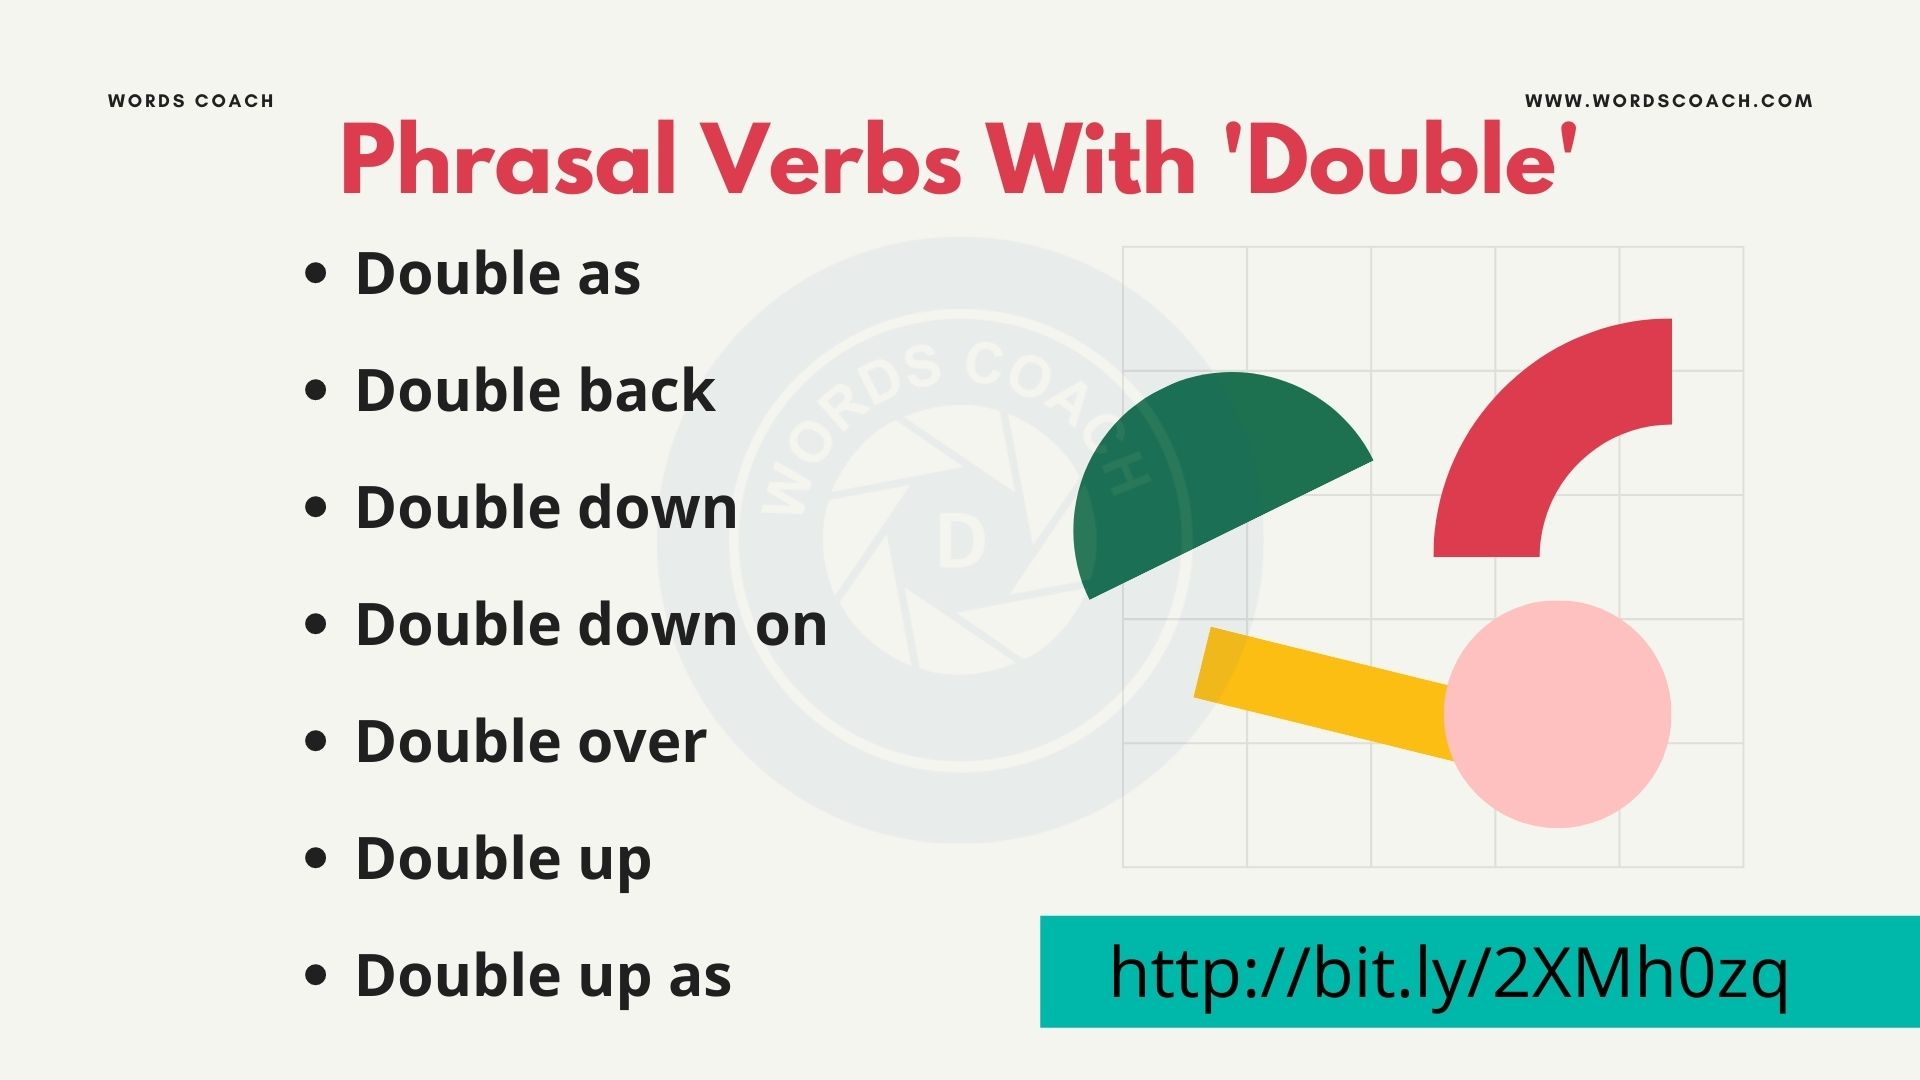 Phrasal Verbs With 'Double'